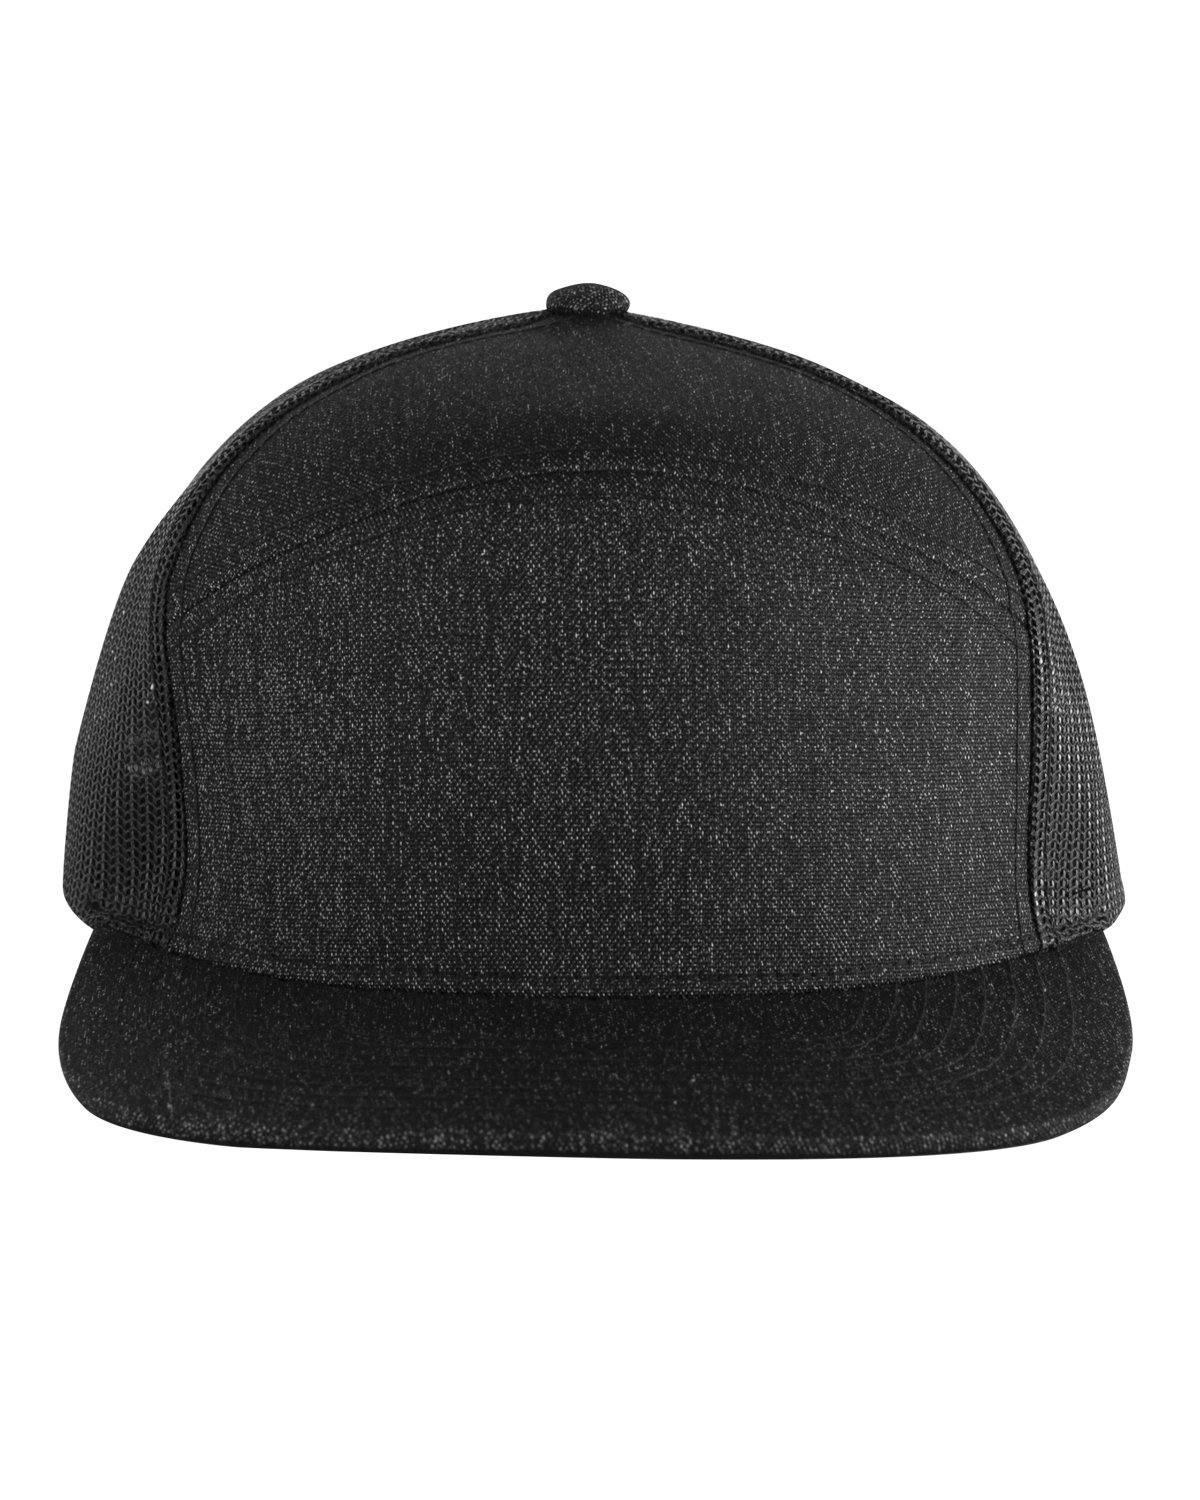 Image for Heathered 6-Panel Arch Trucker Snapback Cap